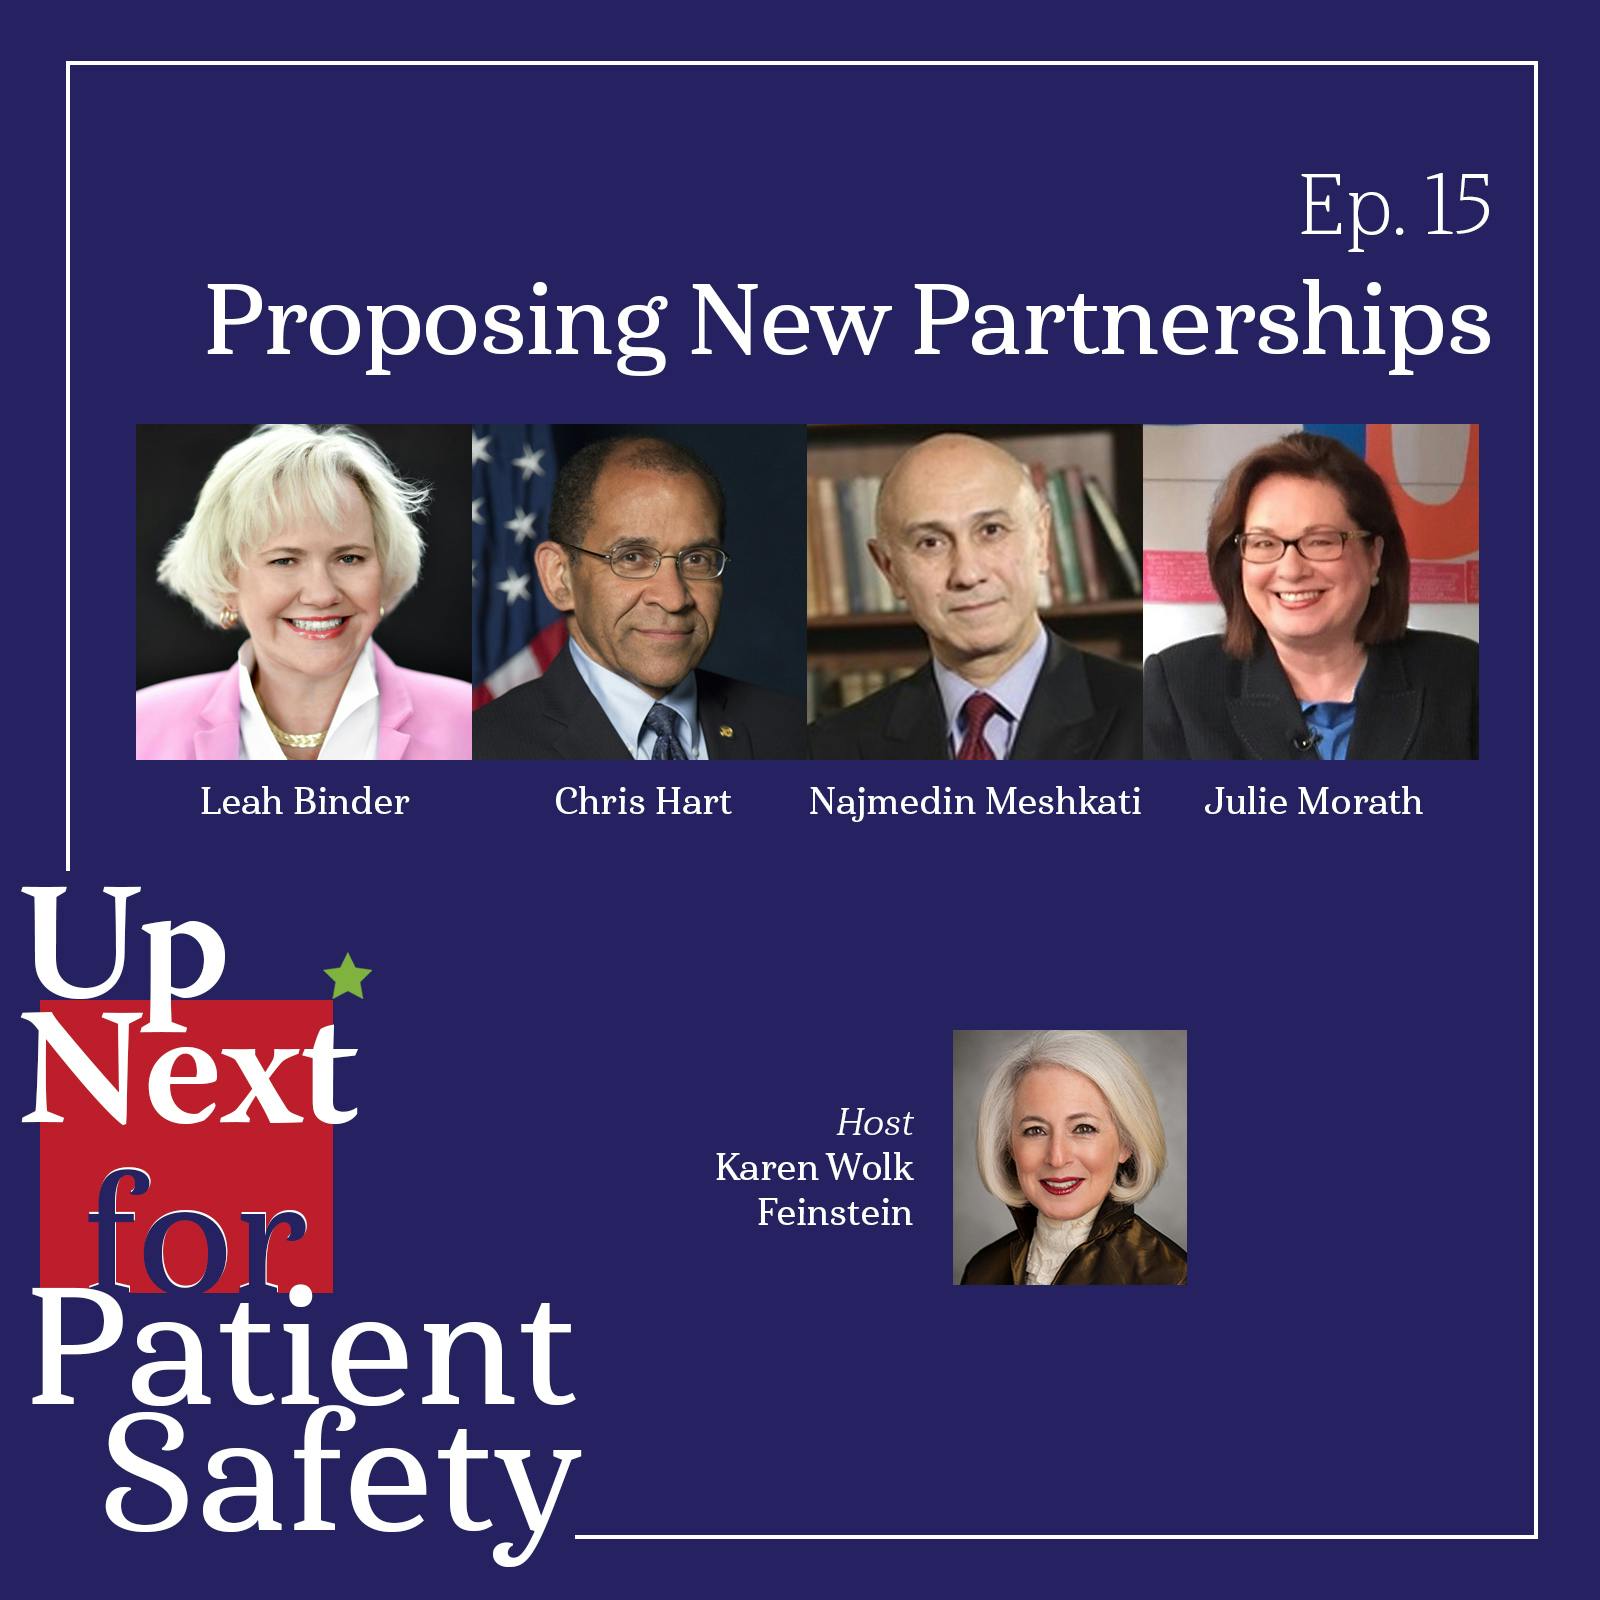 Up Next for Patient Safety: Proposing New Partnerships